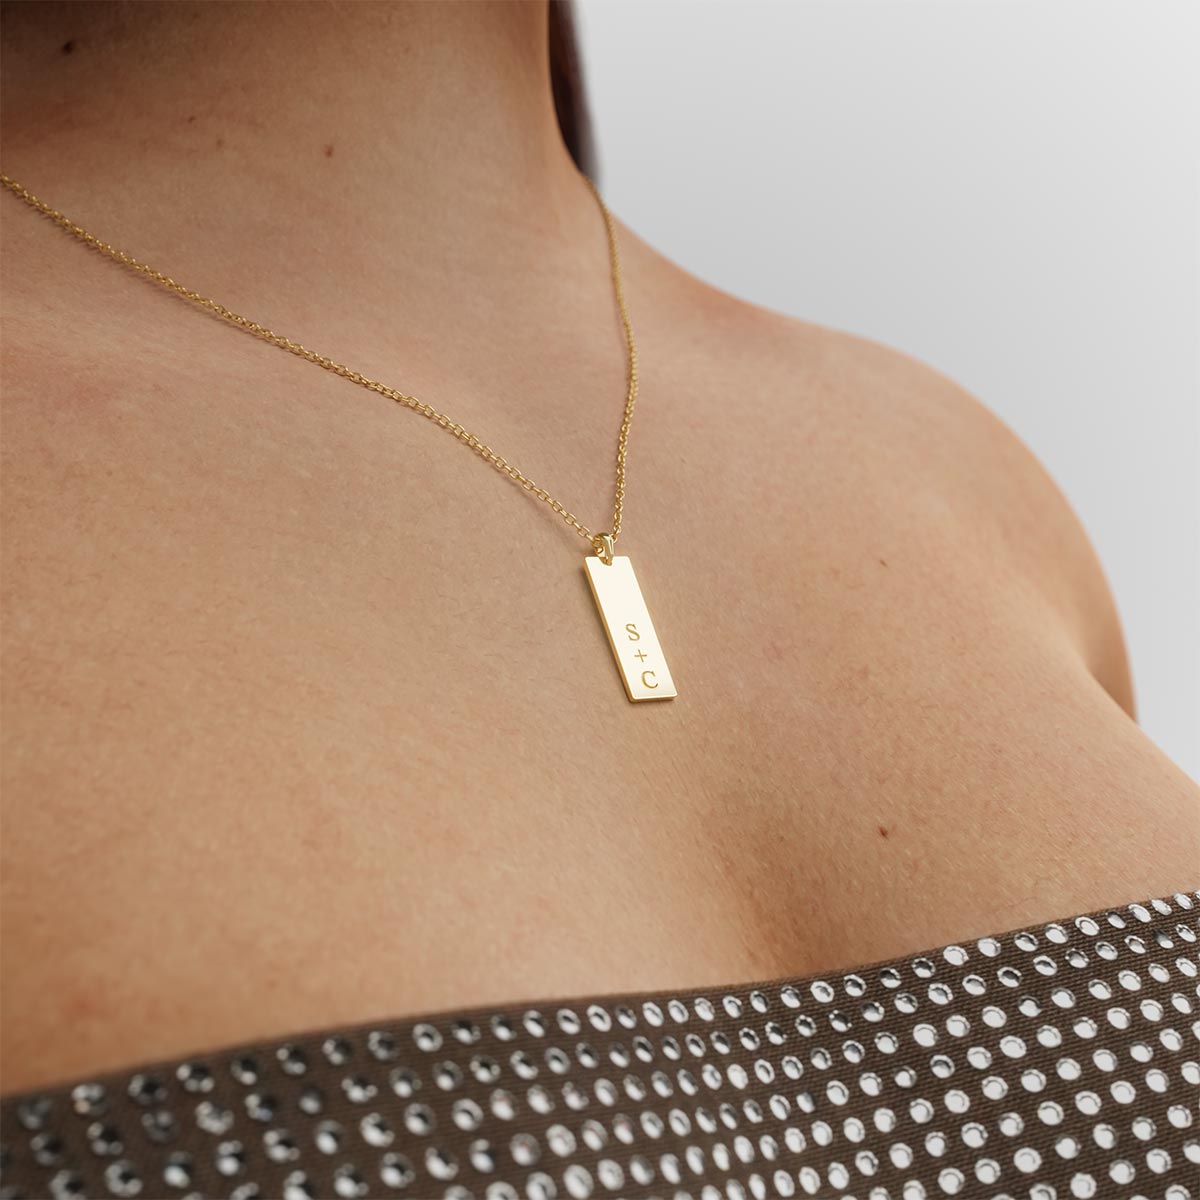 Couple's Initials Vertical Bar Necklace